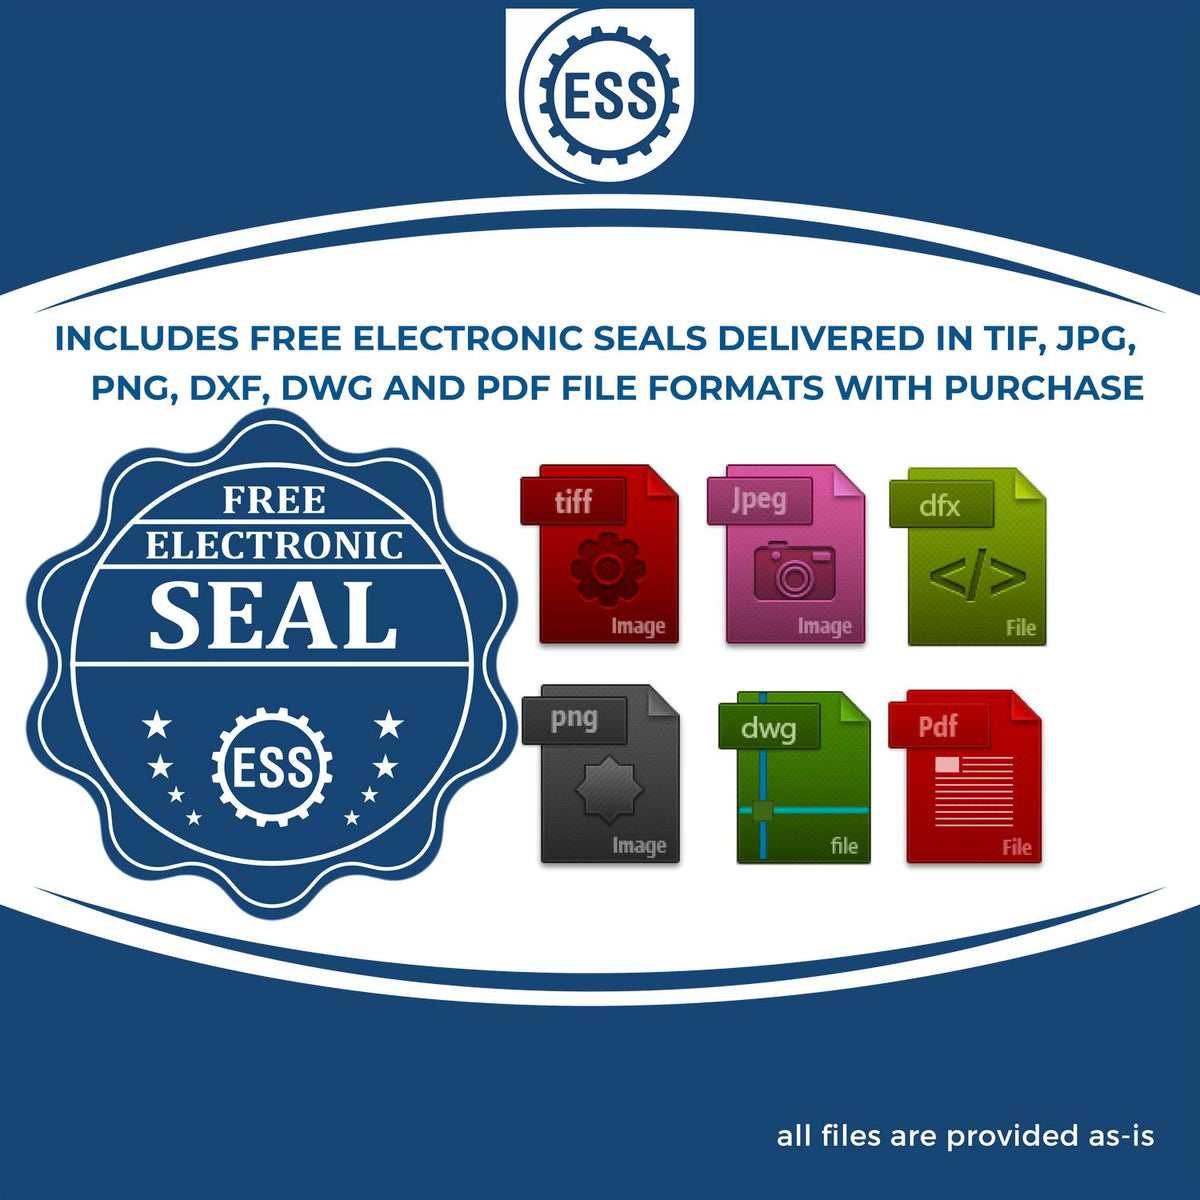 An infographic for the free electronic seal for the Gift Idaho Land Surveyor Seal illustrating the different file type icons such as DXF, DWG, TIF, JPG and PNG.